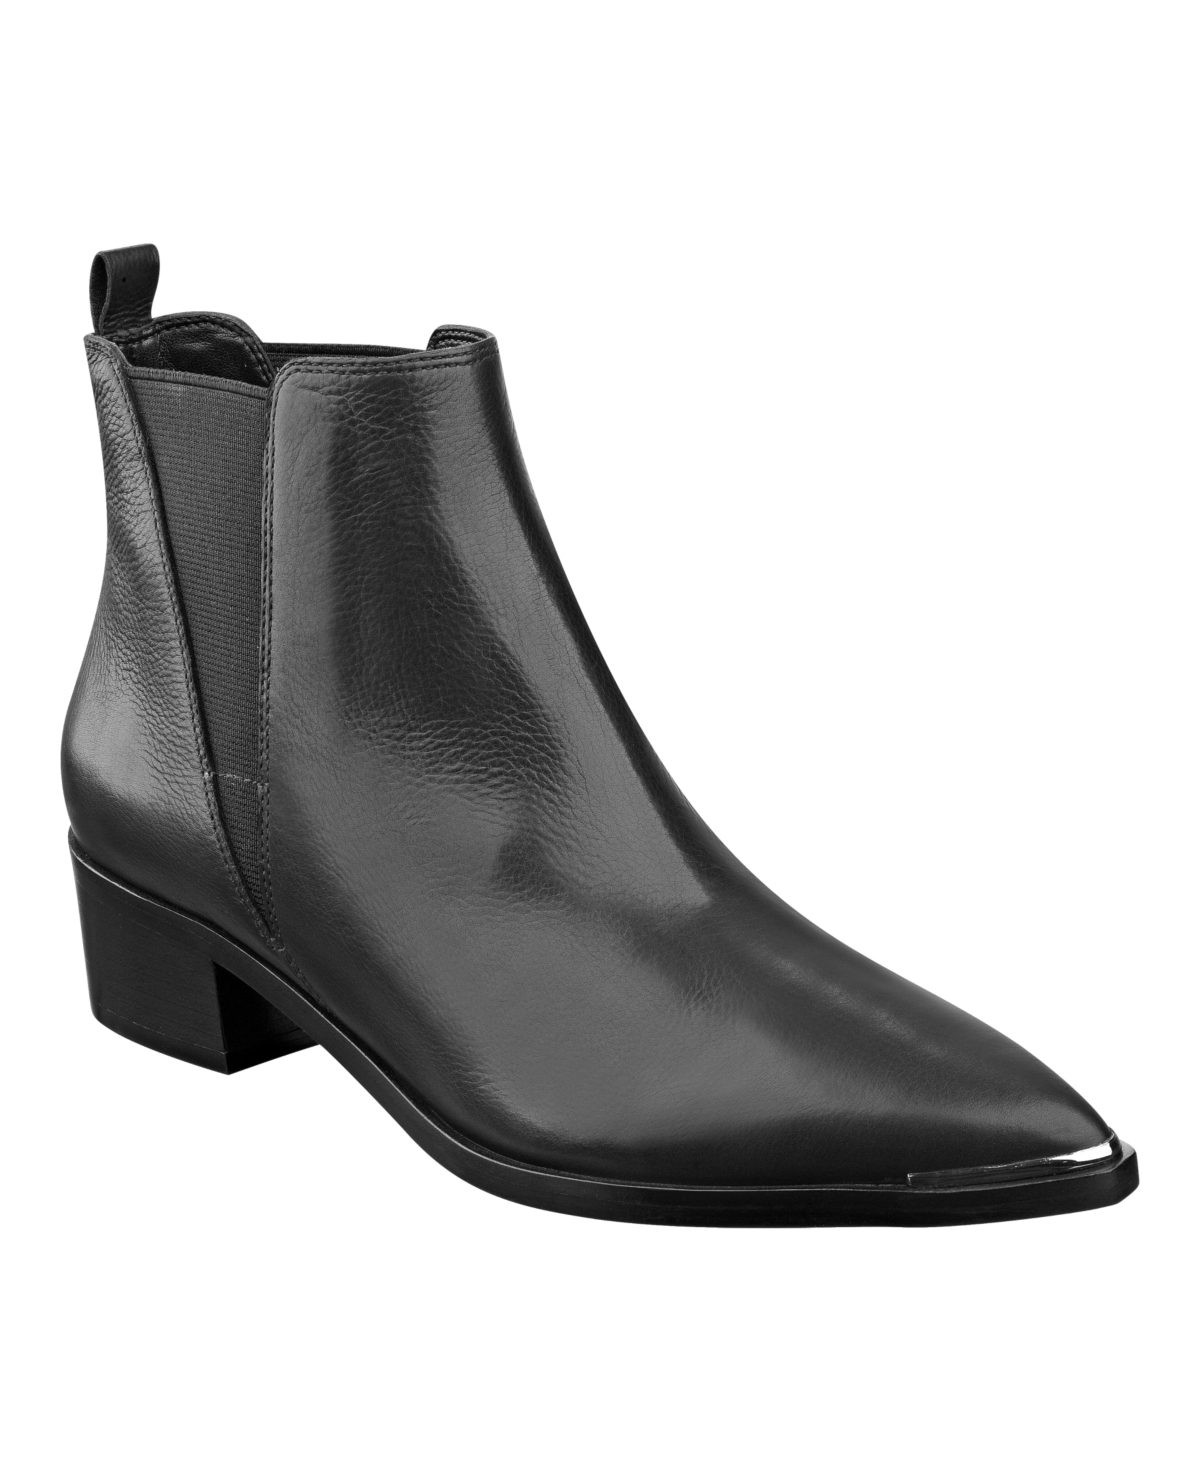 Women's Yale Pointy Toe Chelsea Booties - Black Leather